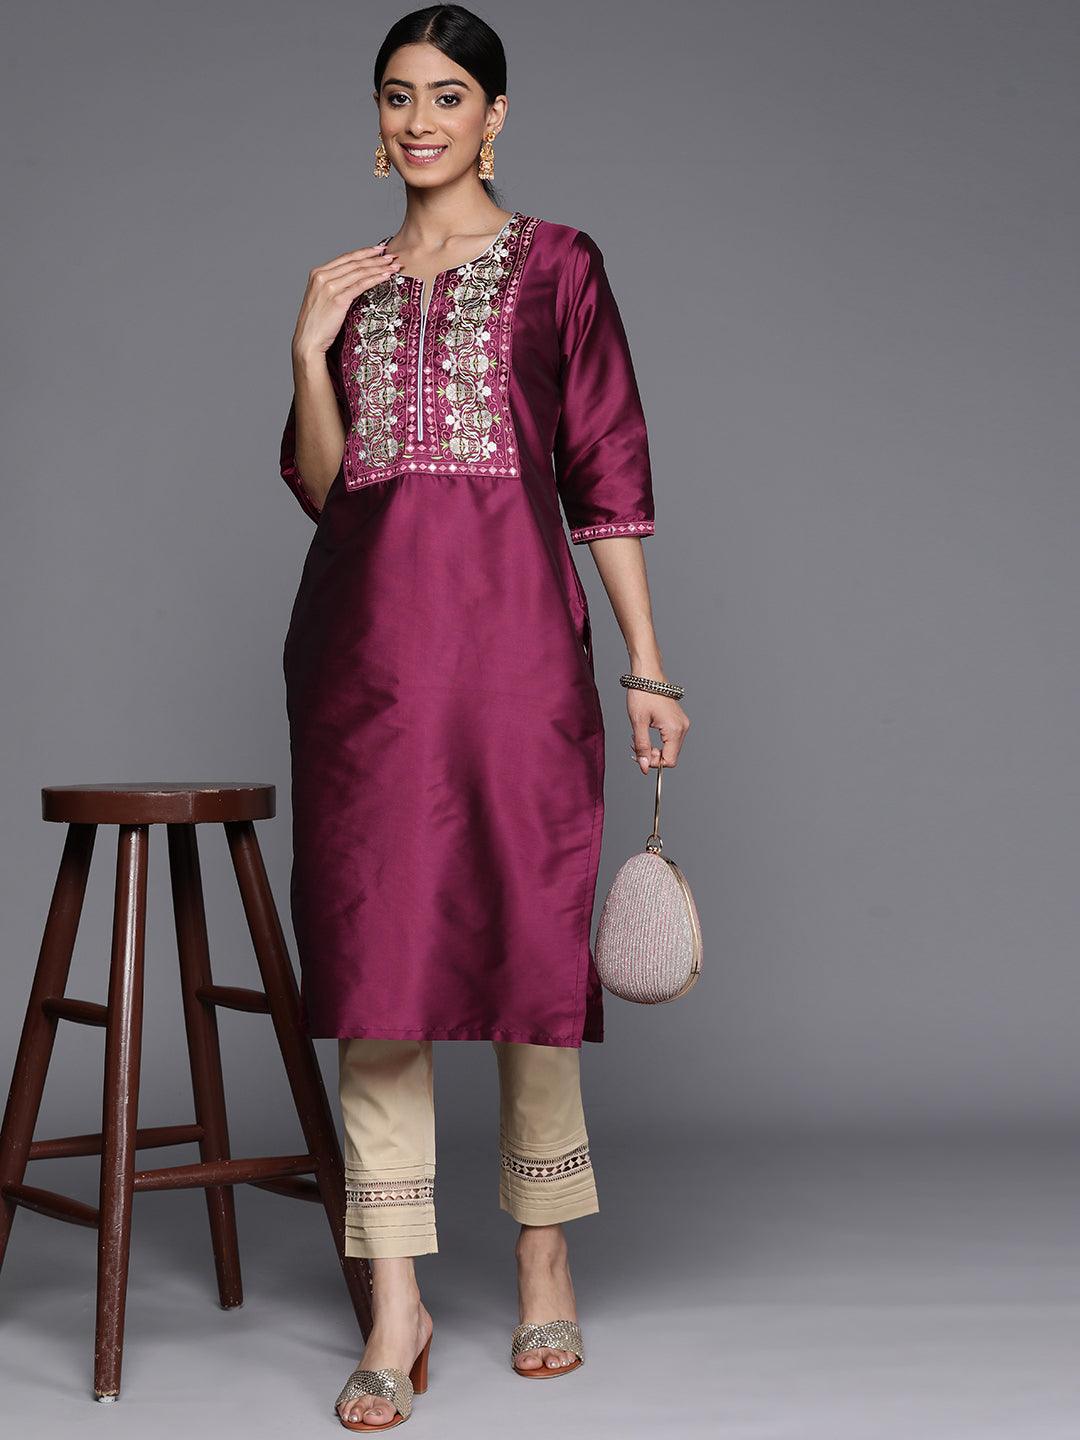 New Raahat Vol 1 Embroidery Roman Silk Kurtis With Pants Collection Catalog